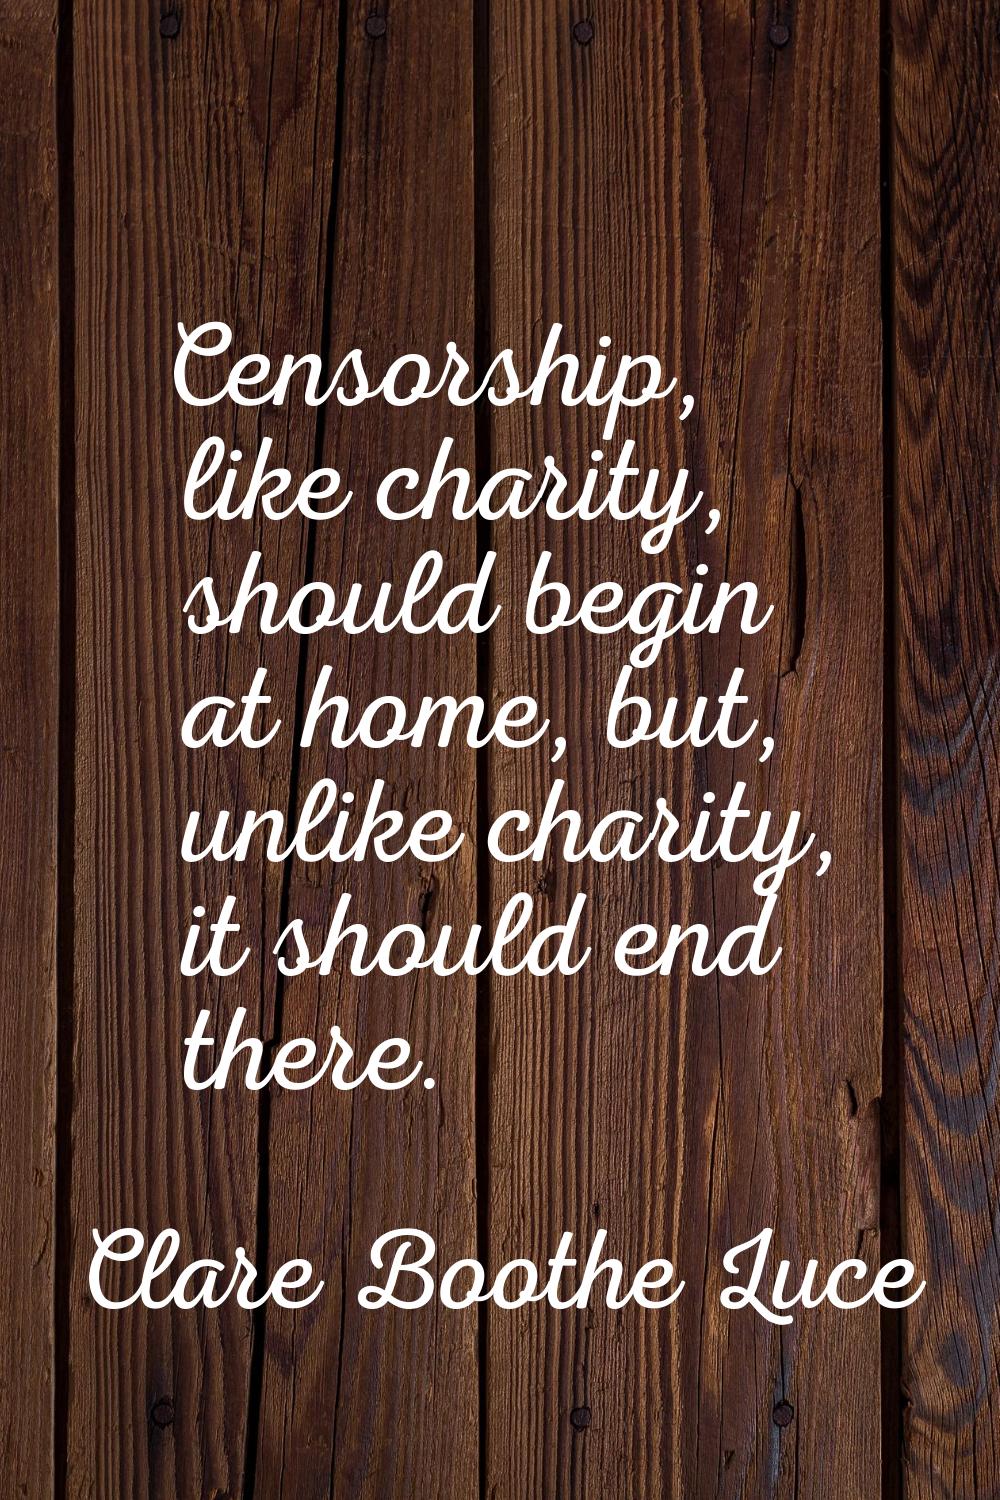 Censorship, like charity, should begin at home, but, unlike charity, it should end there.